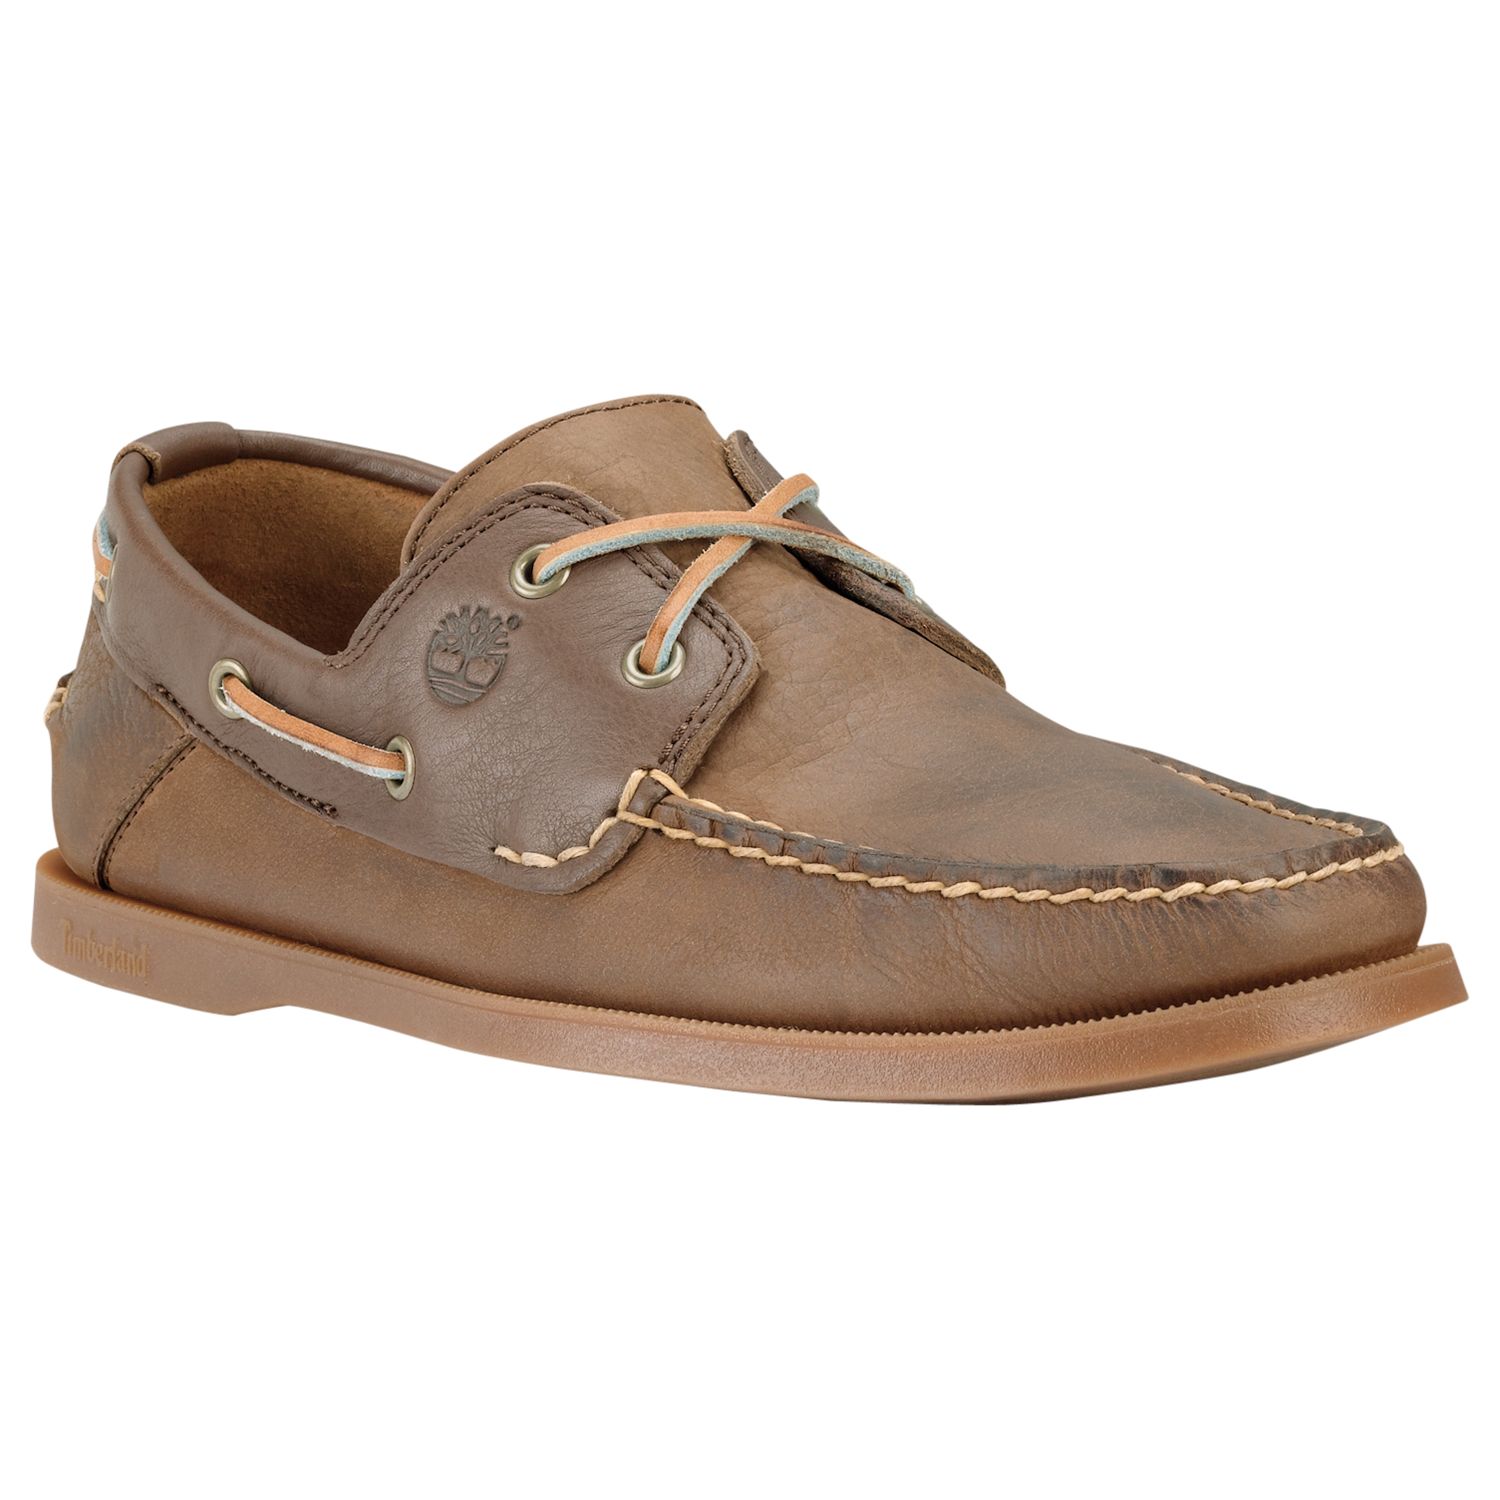 timberland boat shoes mens